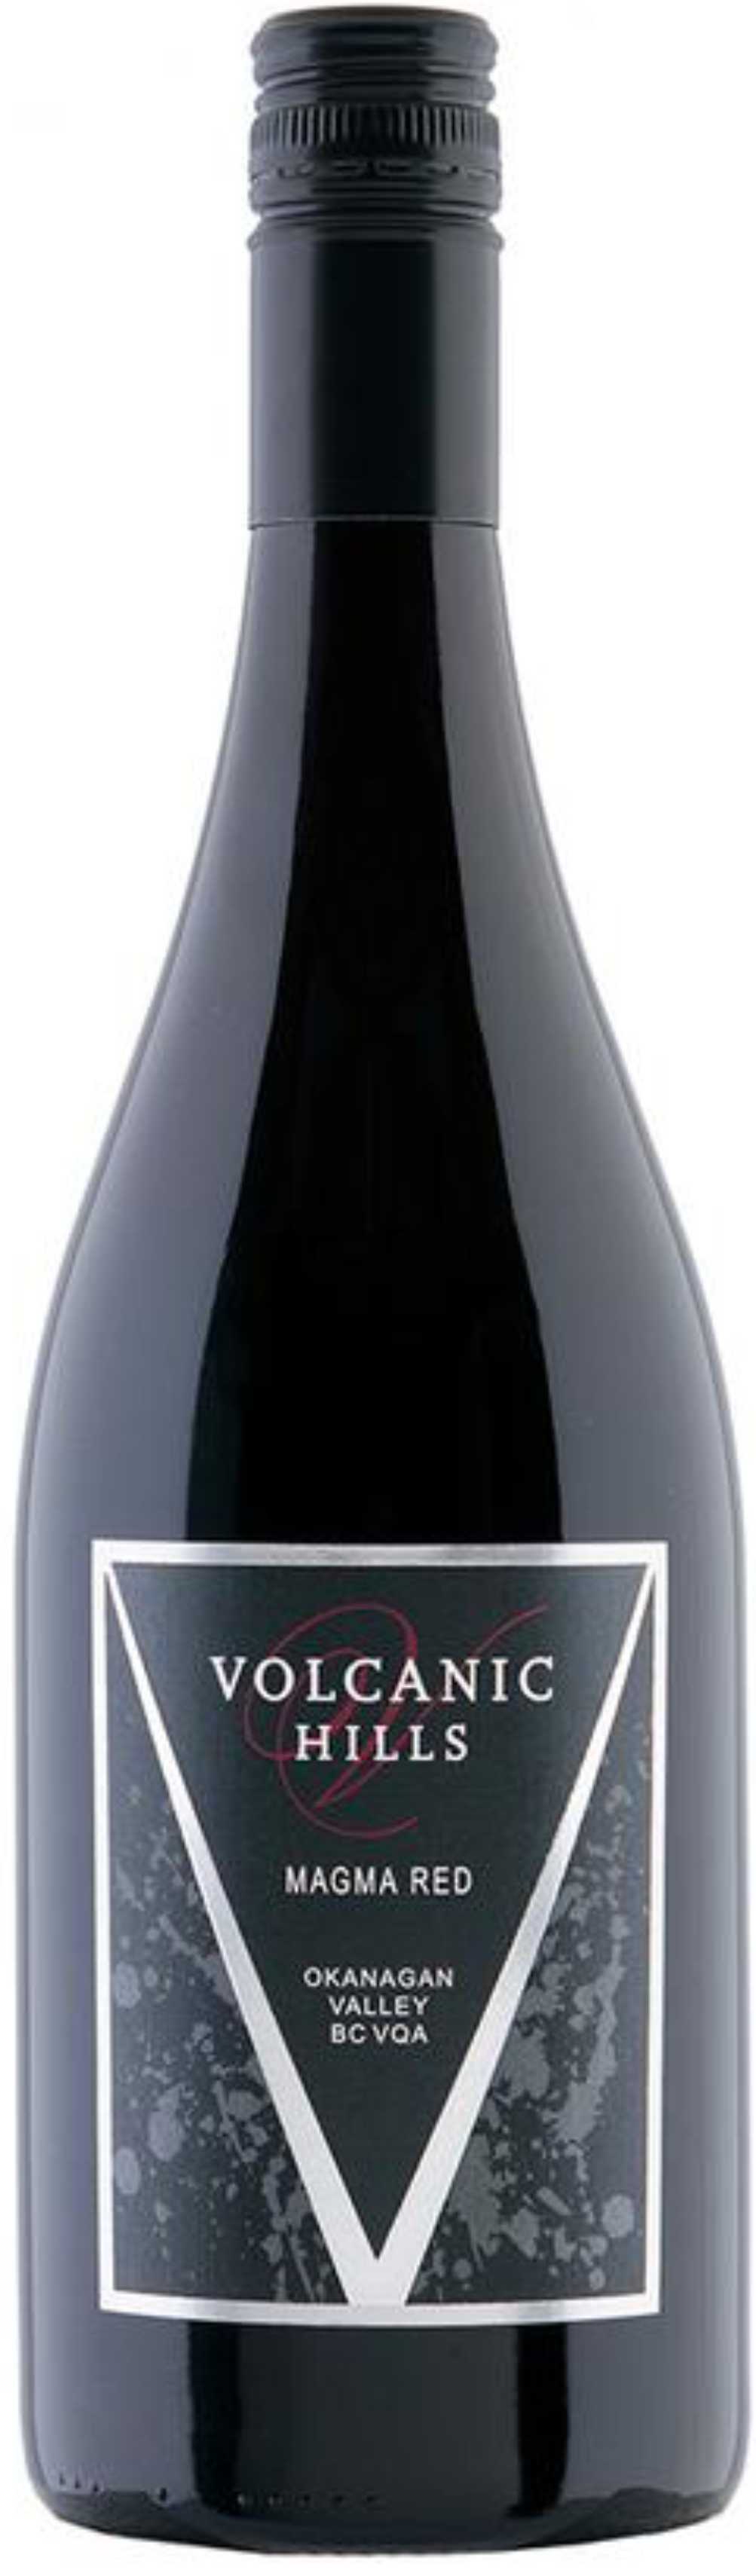 Volcanic Hills Estate Winery Magma Red 